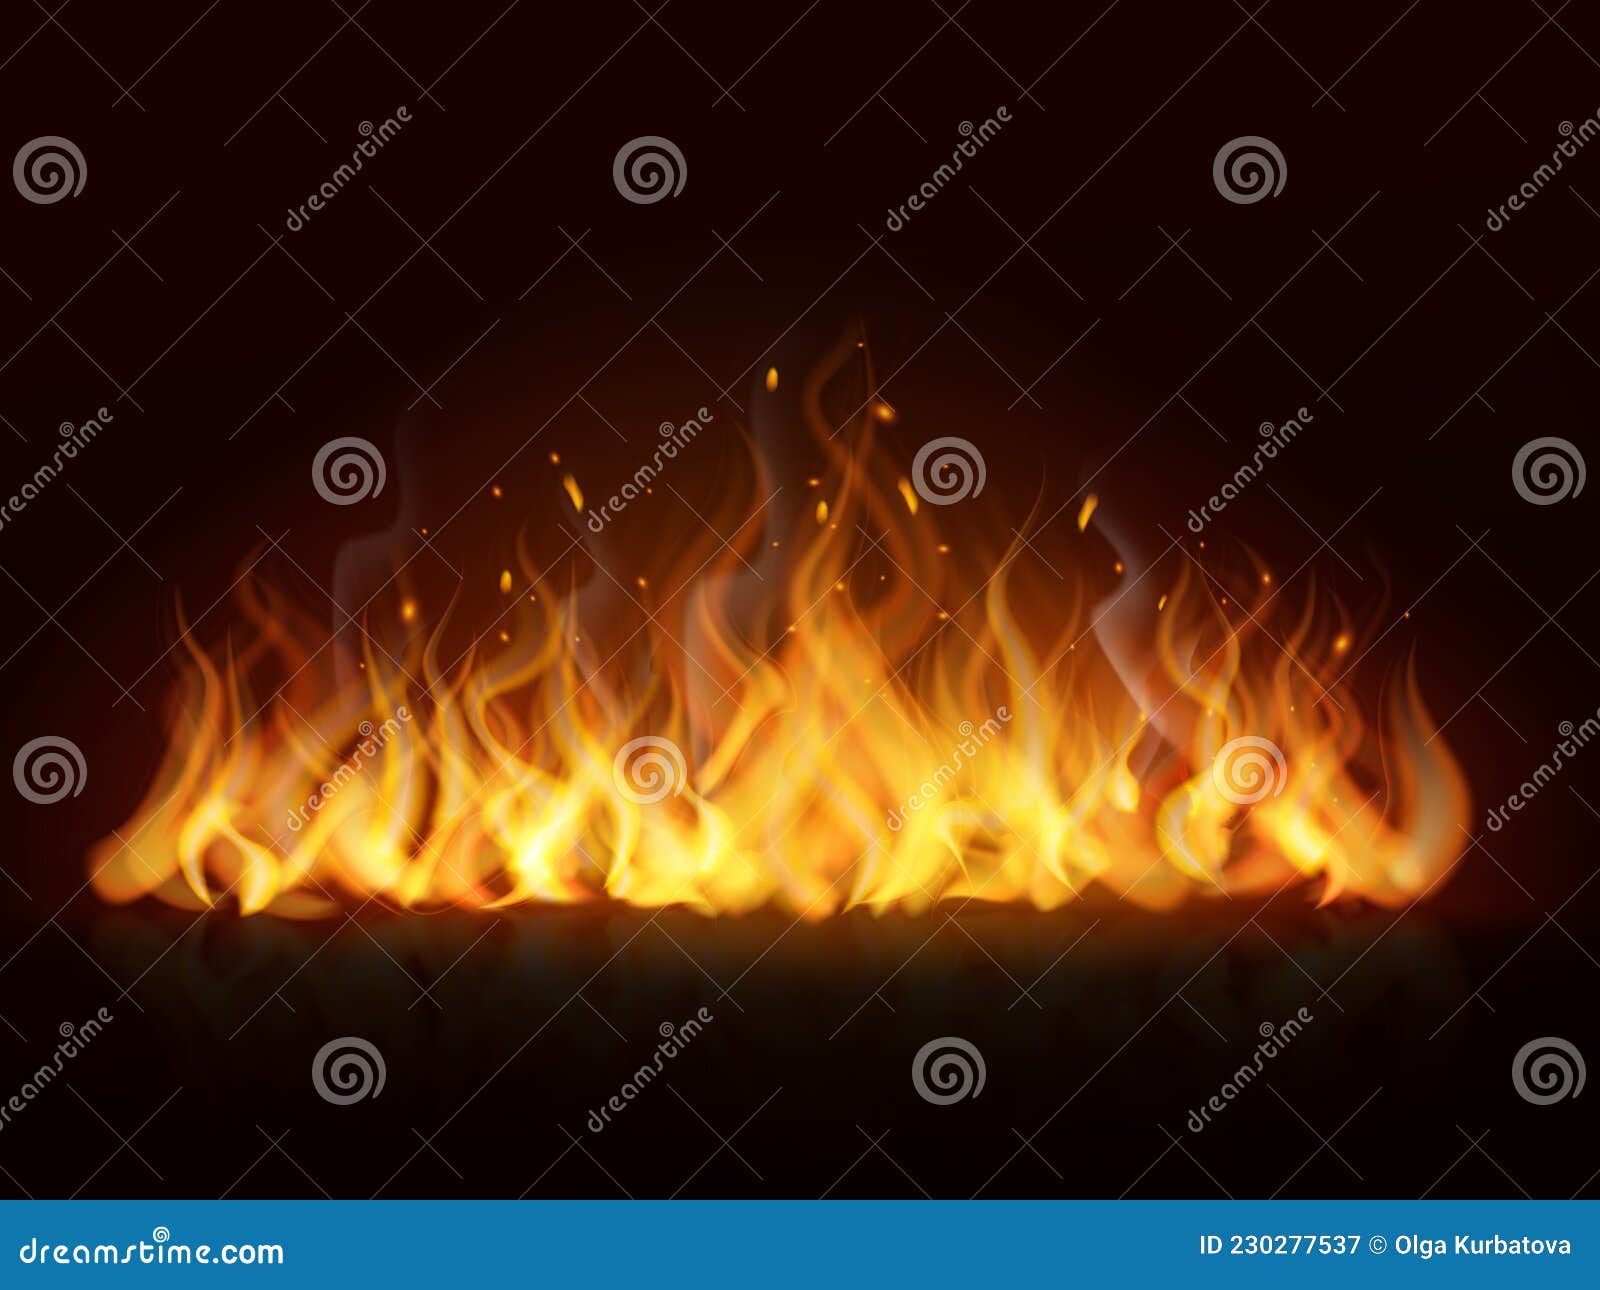 Flame Line Realistic. Hot Fireplace Flames Burning Fiery Wall Warm